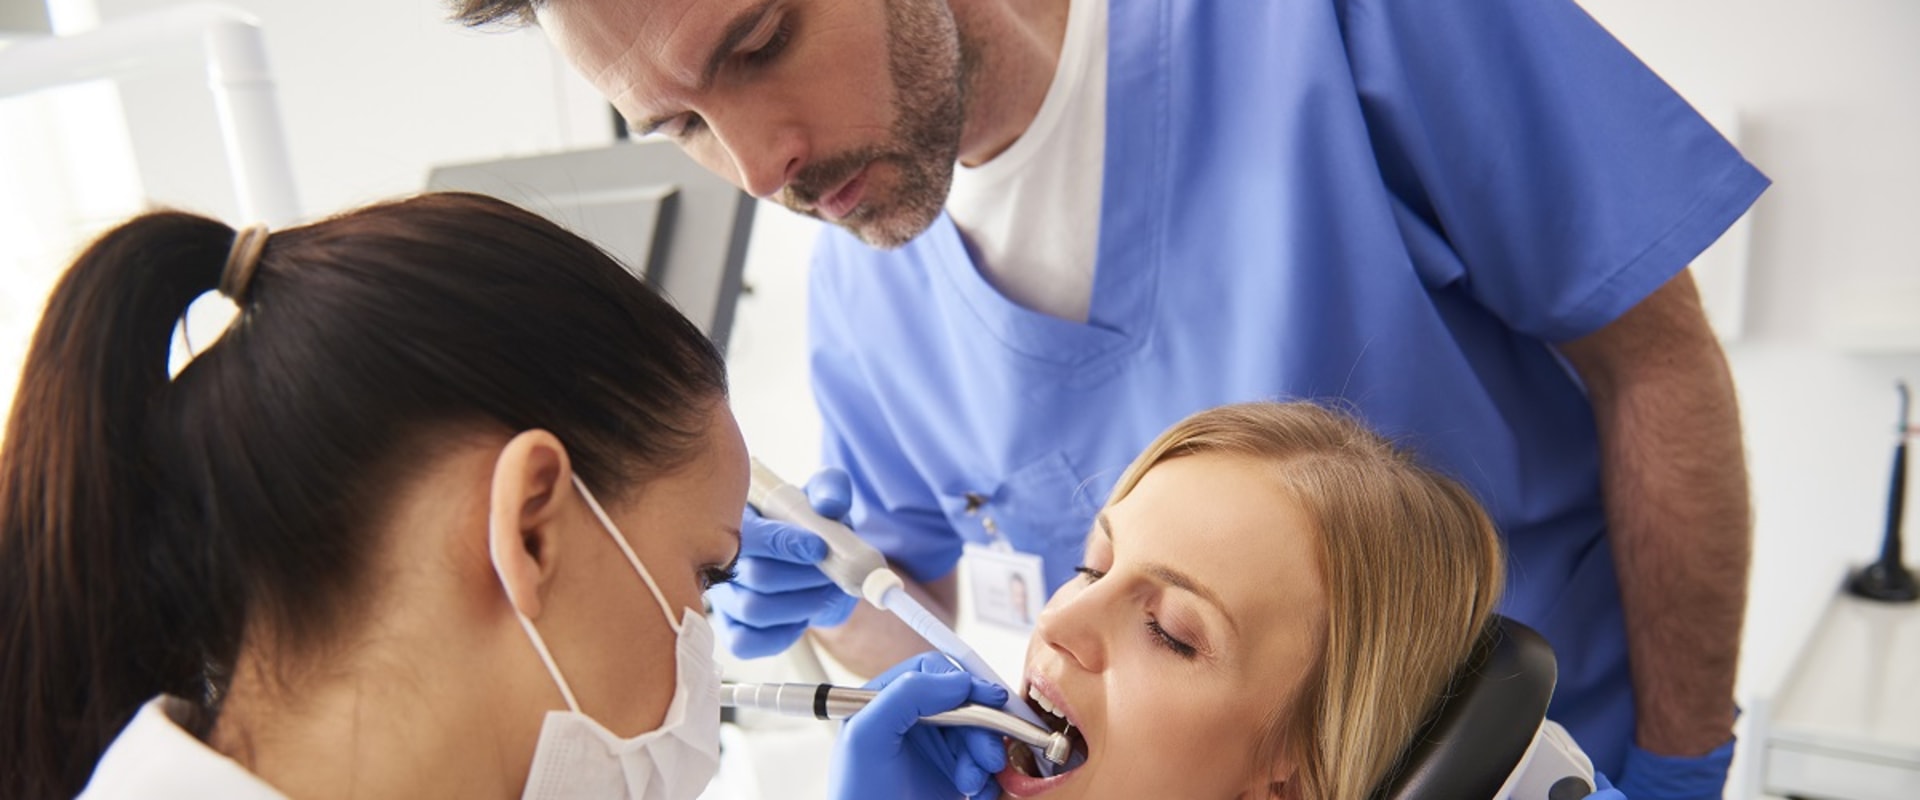 What does an endodontist do besides root canals?